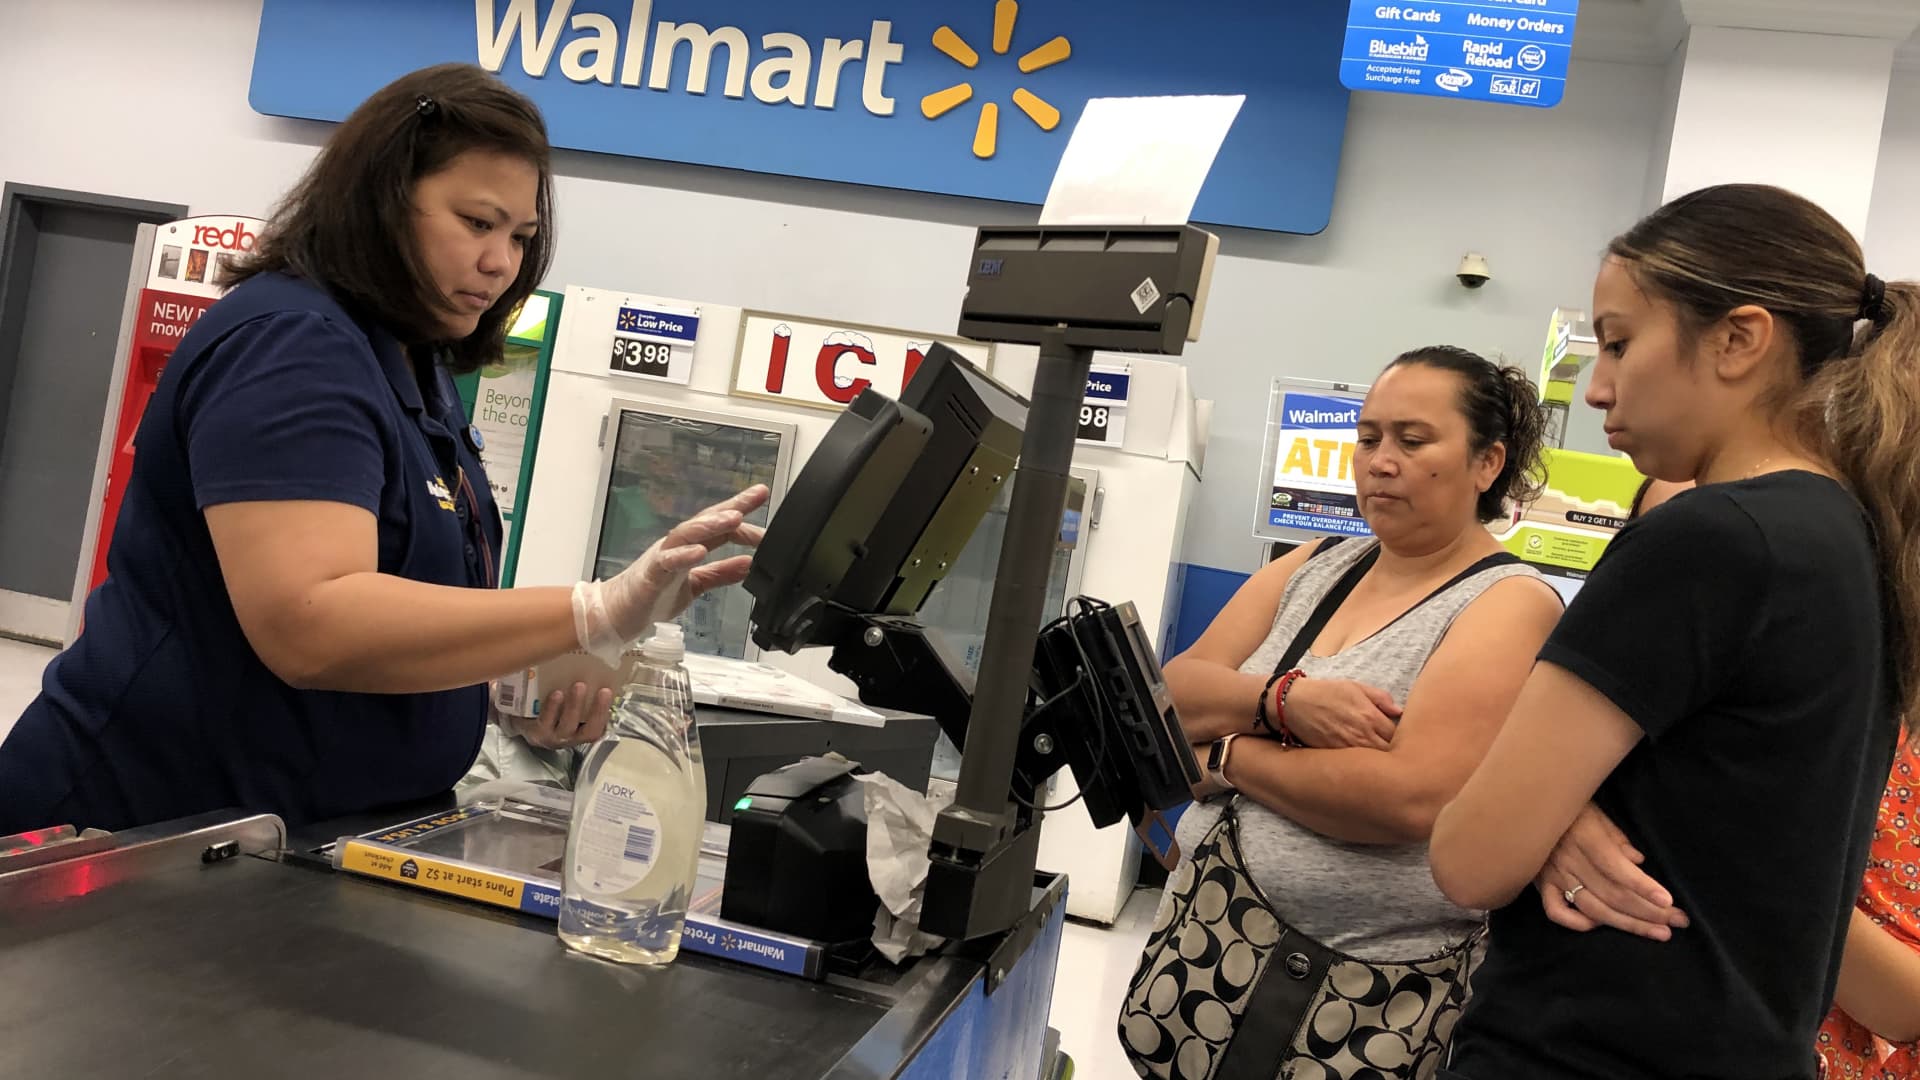 Walmart likely discriminated against female workers in stores, WSJ says